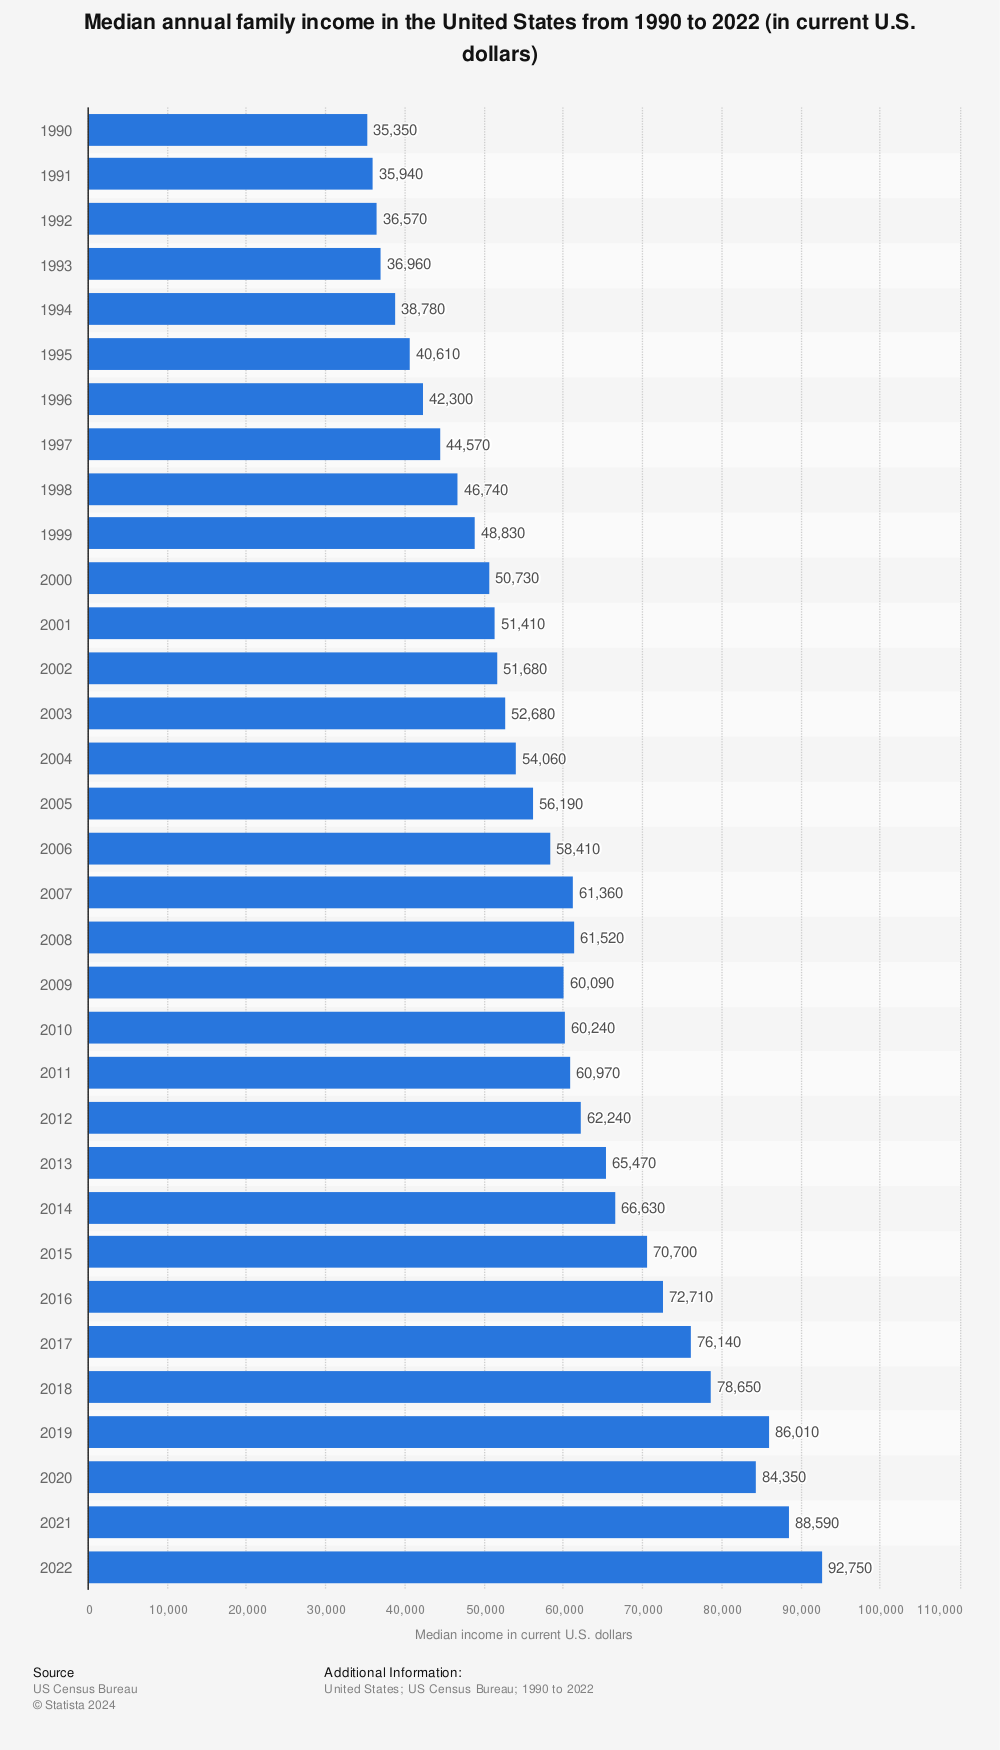 Statistic: Median annual family income in the United States from 1990 to 2022 (in current U.S. dollars) | Statista